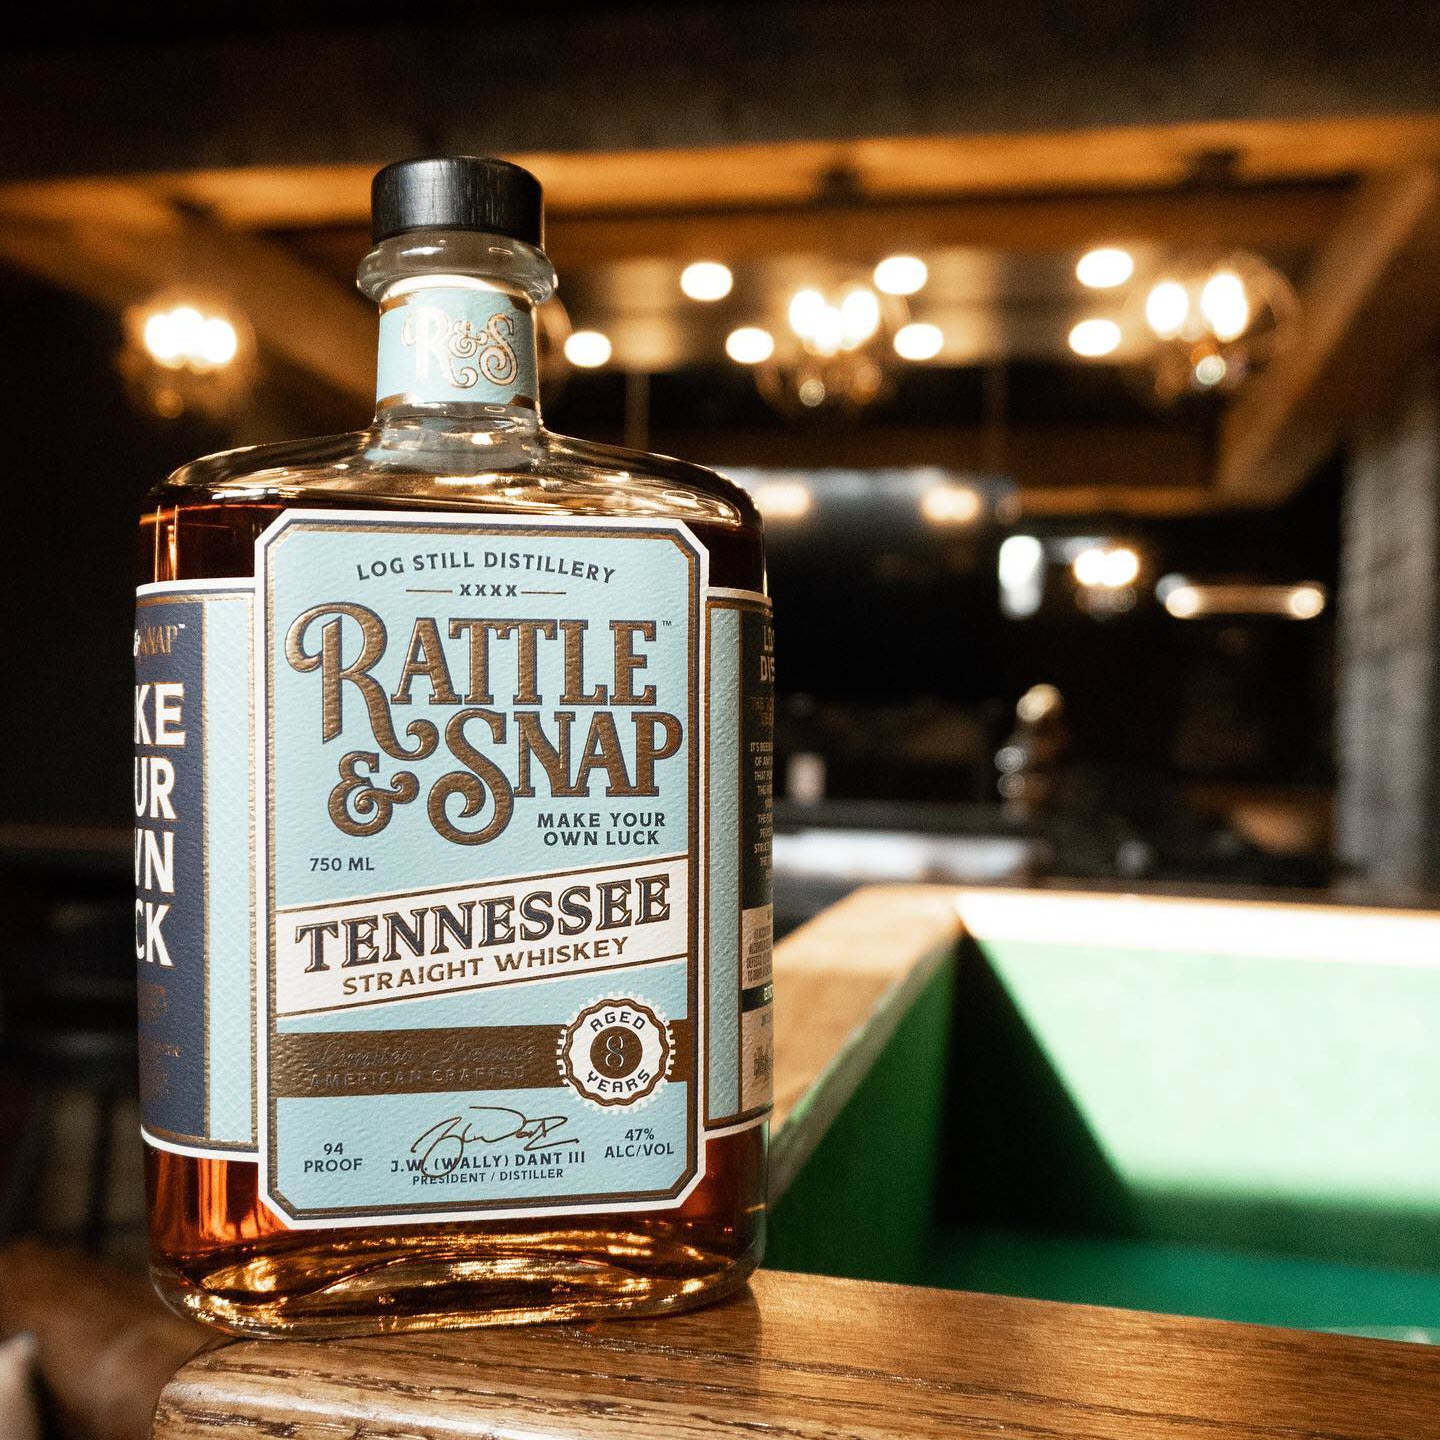 Log Still Distillery - Rattle & Snap 8 Year Old Tennessee Select Straight Whiskey